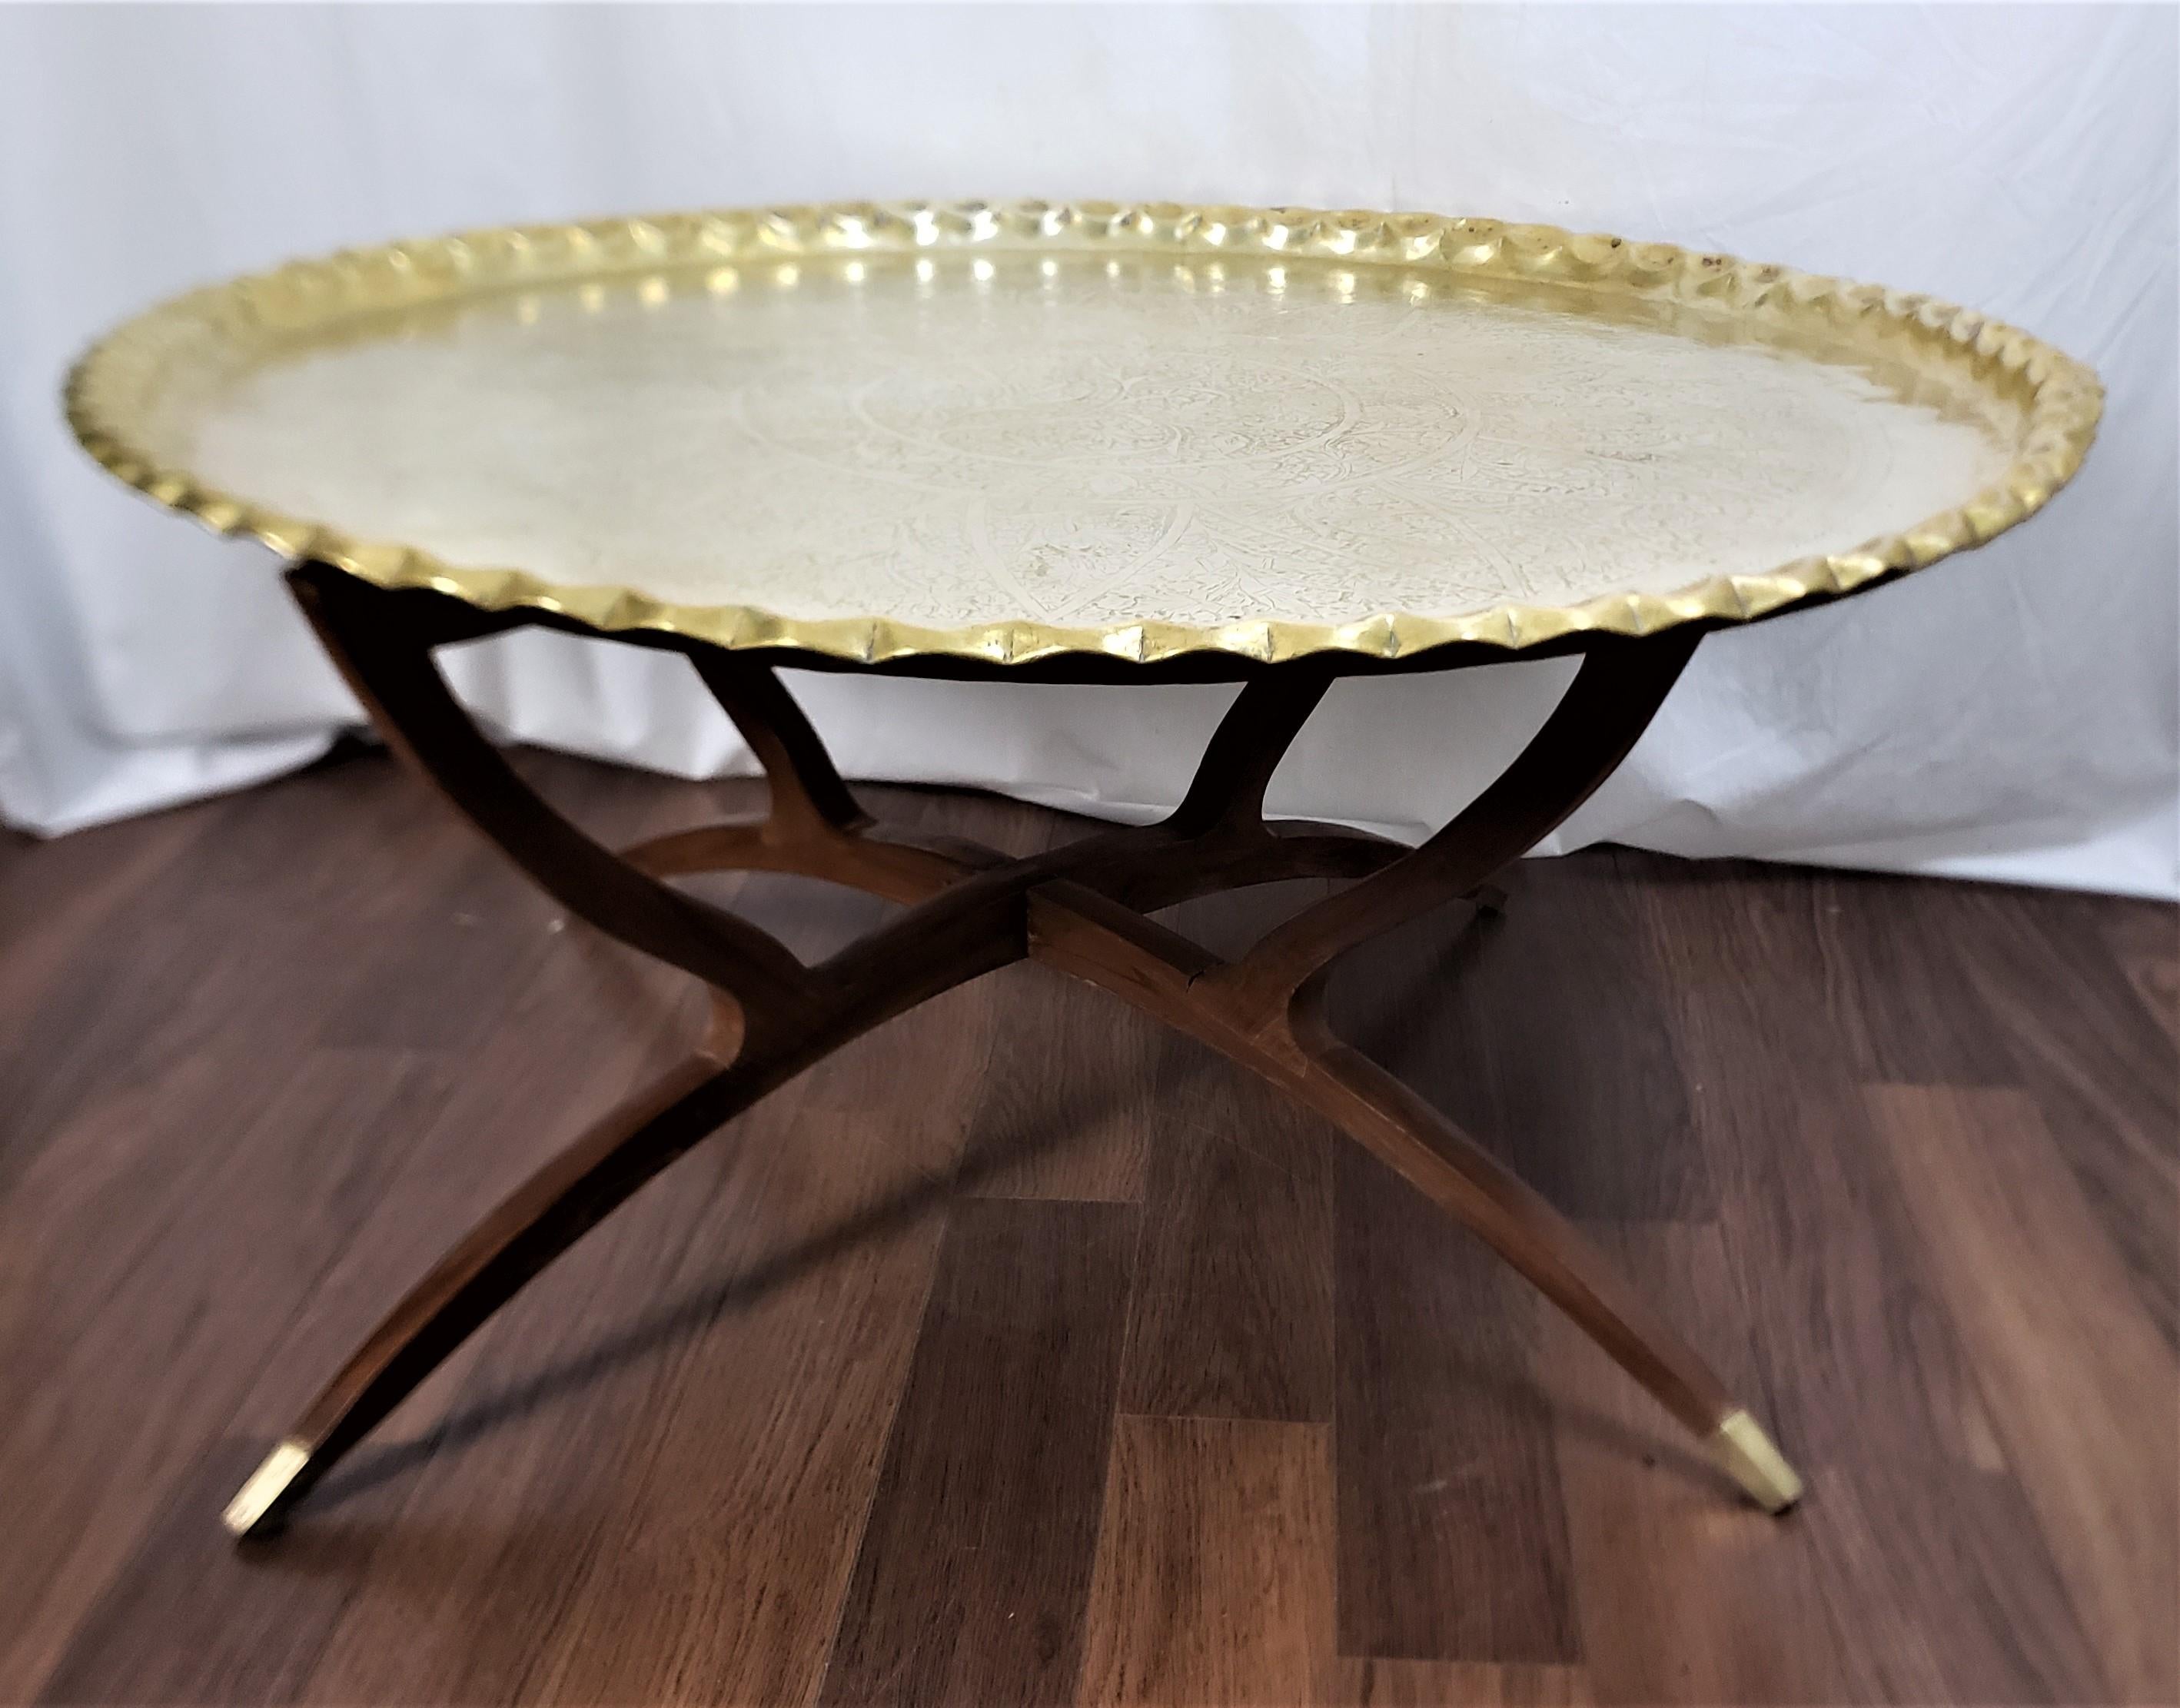 Antique Anglo-Indian Tray Table with Collapsable Spider Legs & Engraved Top In Good Condition For Sale In Hamilton, Ontario